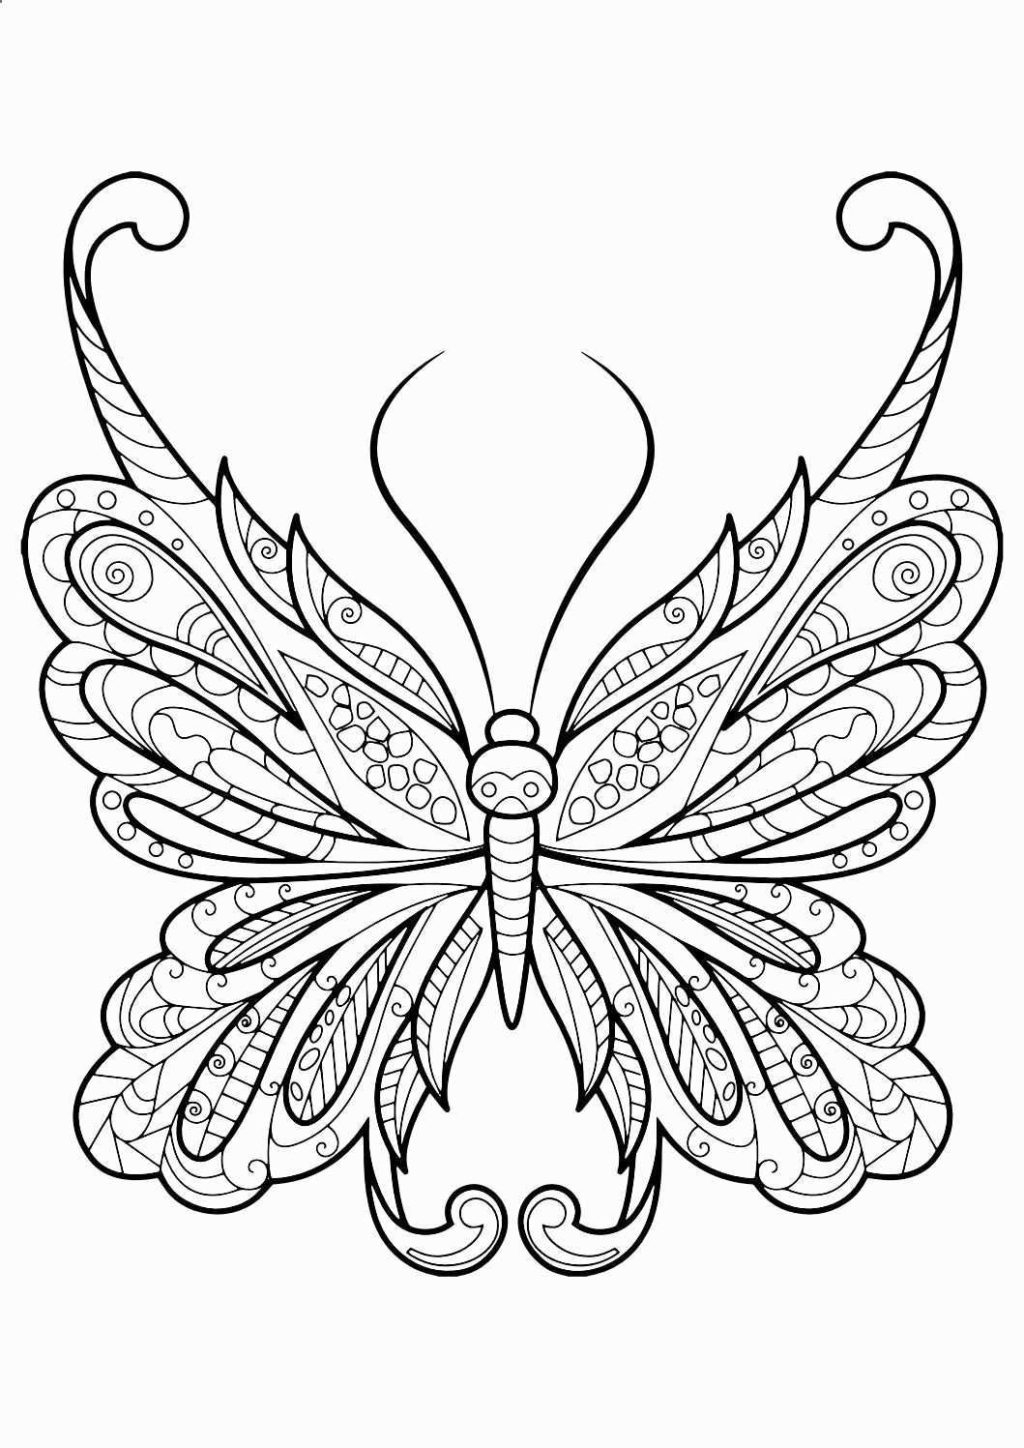 Monarch Butterfly Coloring Page Coloring Books Butterfly Coloring Sheet Books Free Printable